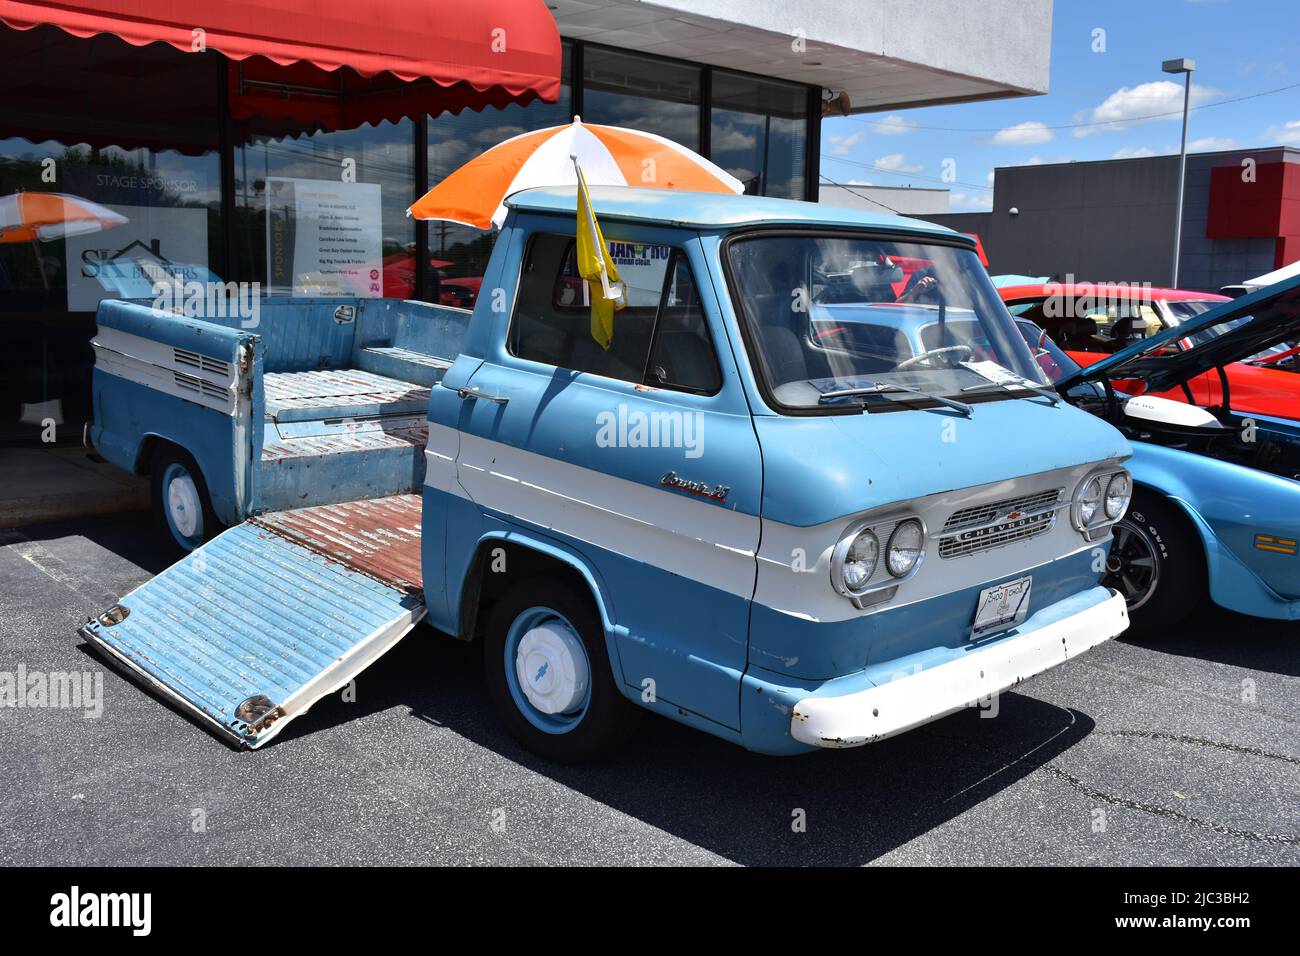 A 1960s Chevrolet Corvair 95 Rampside Pickup Truck on display at a car show. Stock Photo